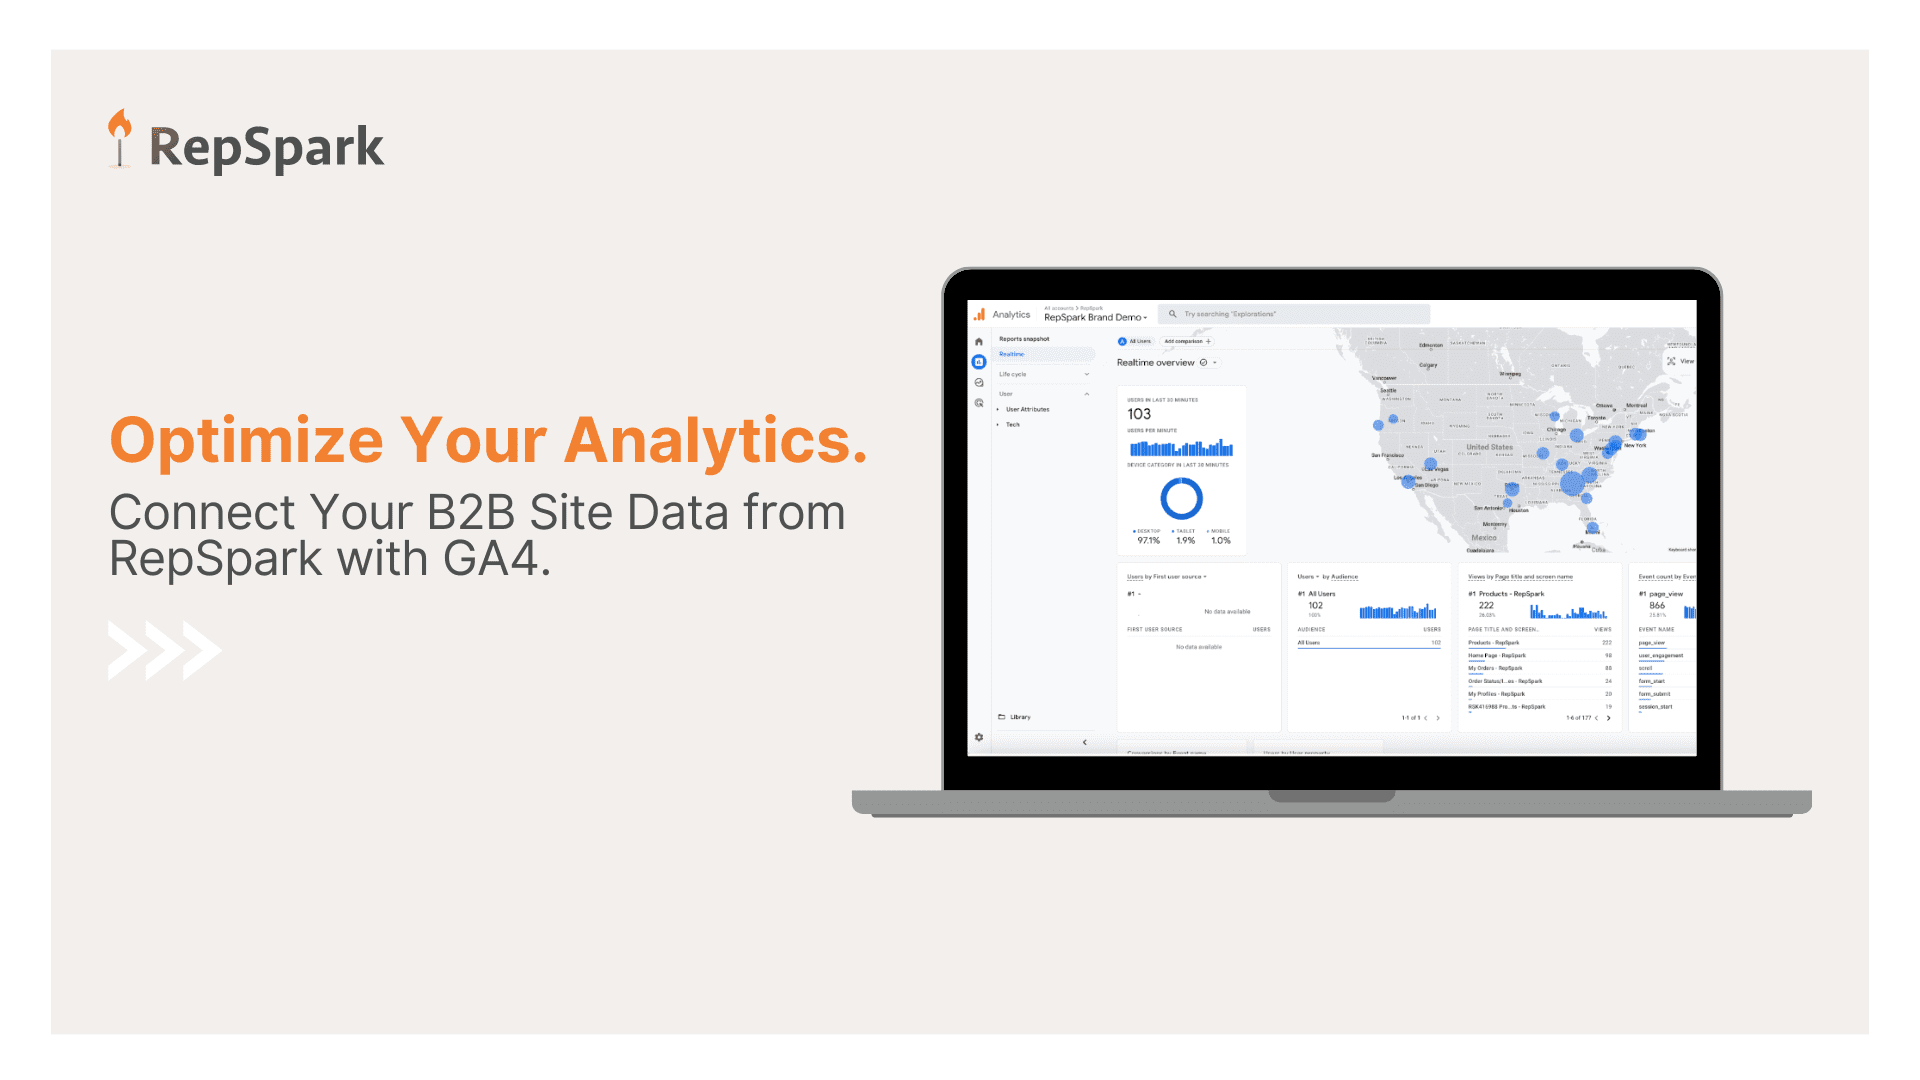 Optimize analytics for more informed decisions and targeted traffic insights for your Digital Marketing and Wholesale Teams.